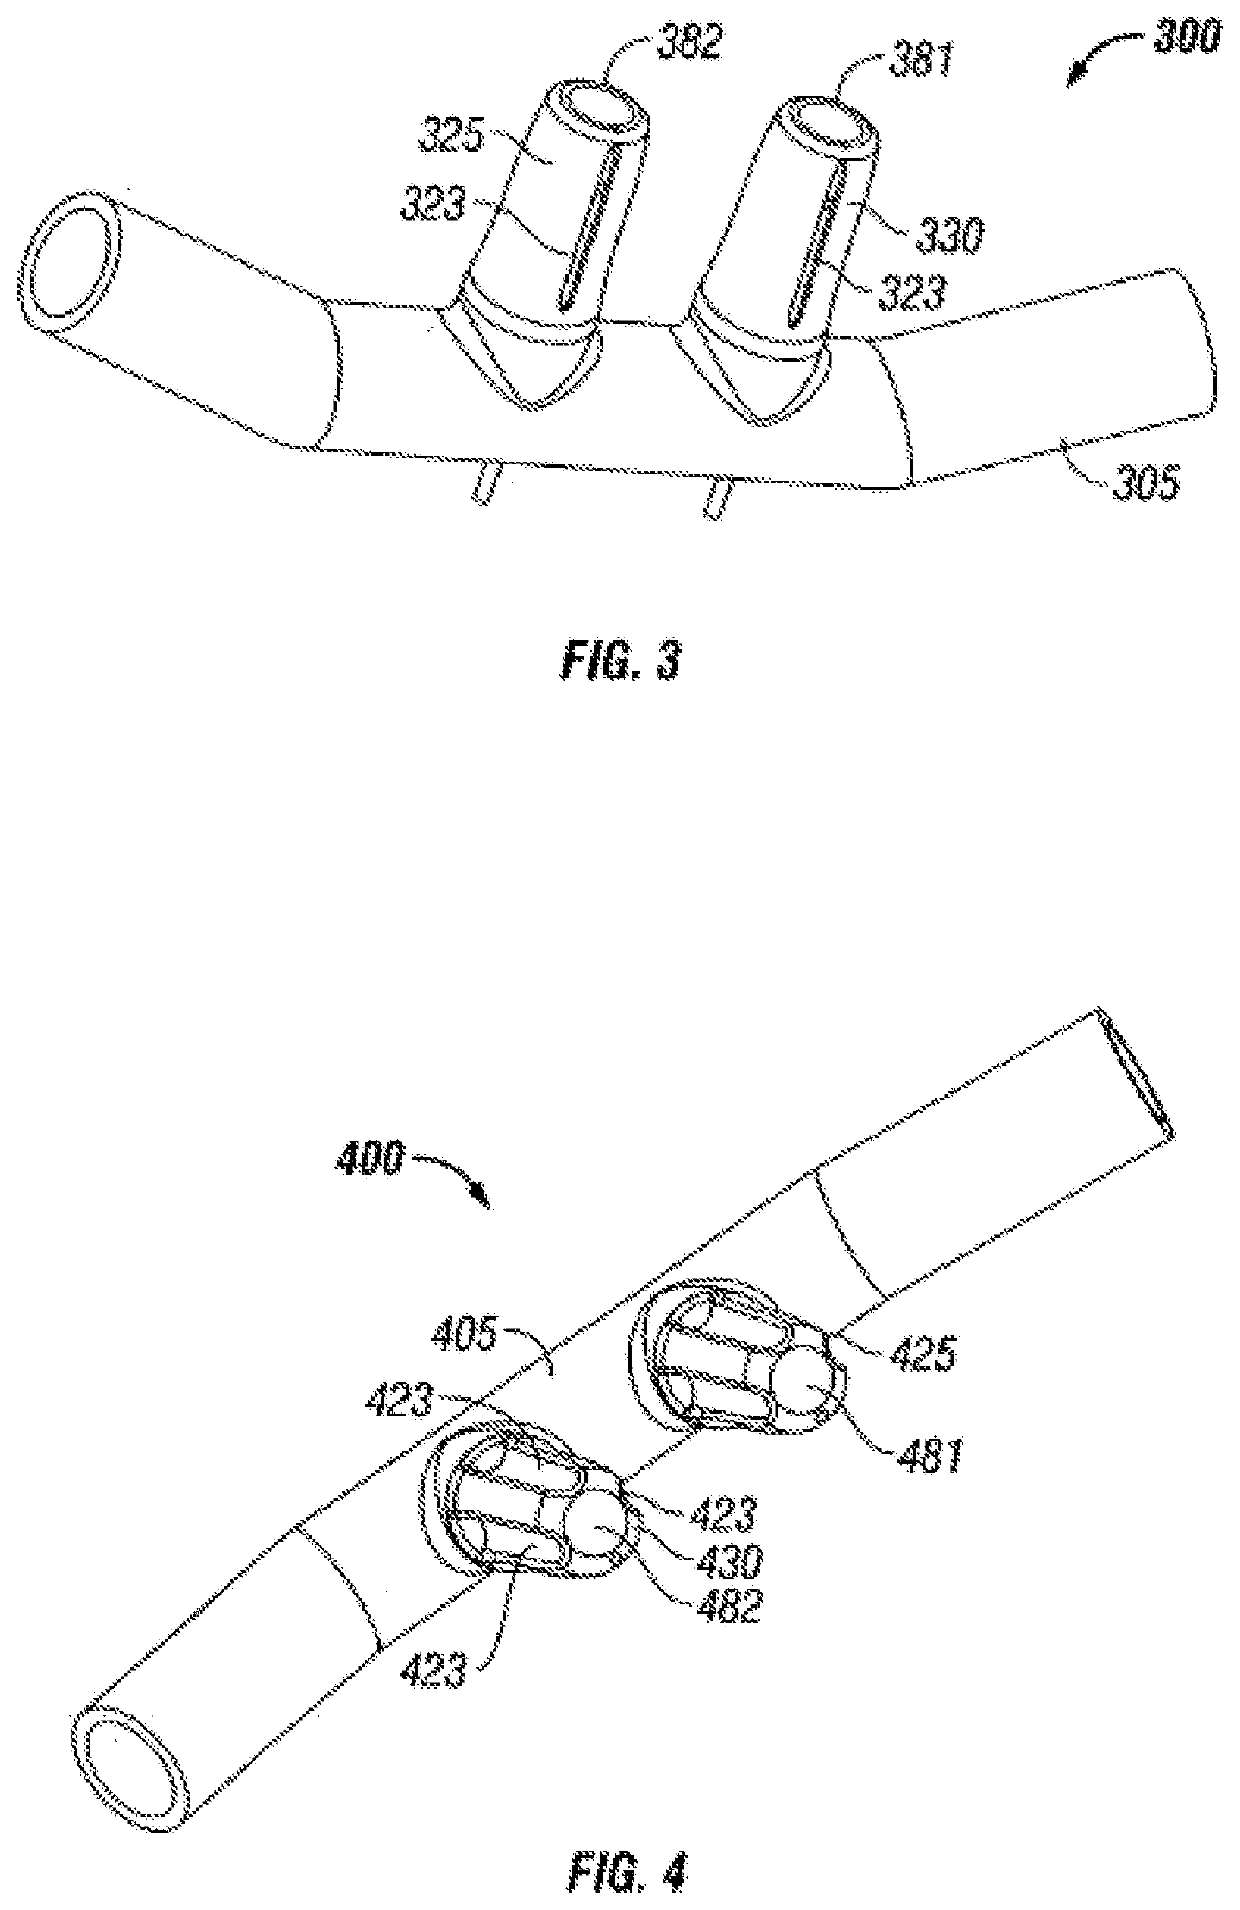 High flow therapy device utilizing a non-sealing respiratory interface and related methods